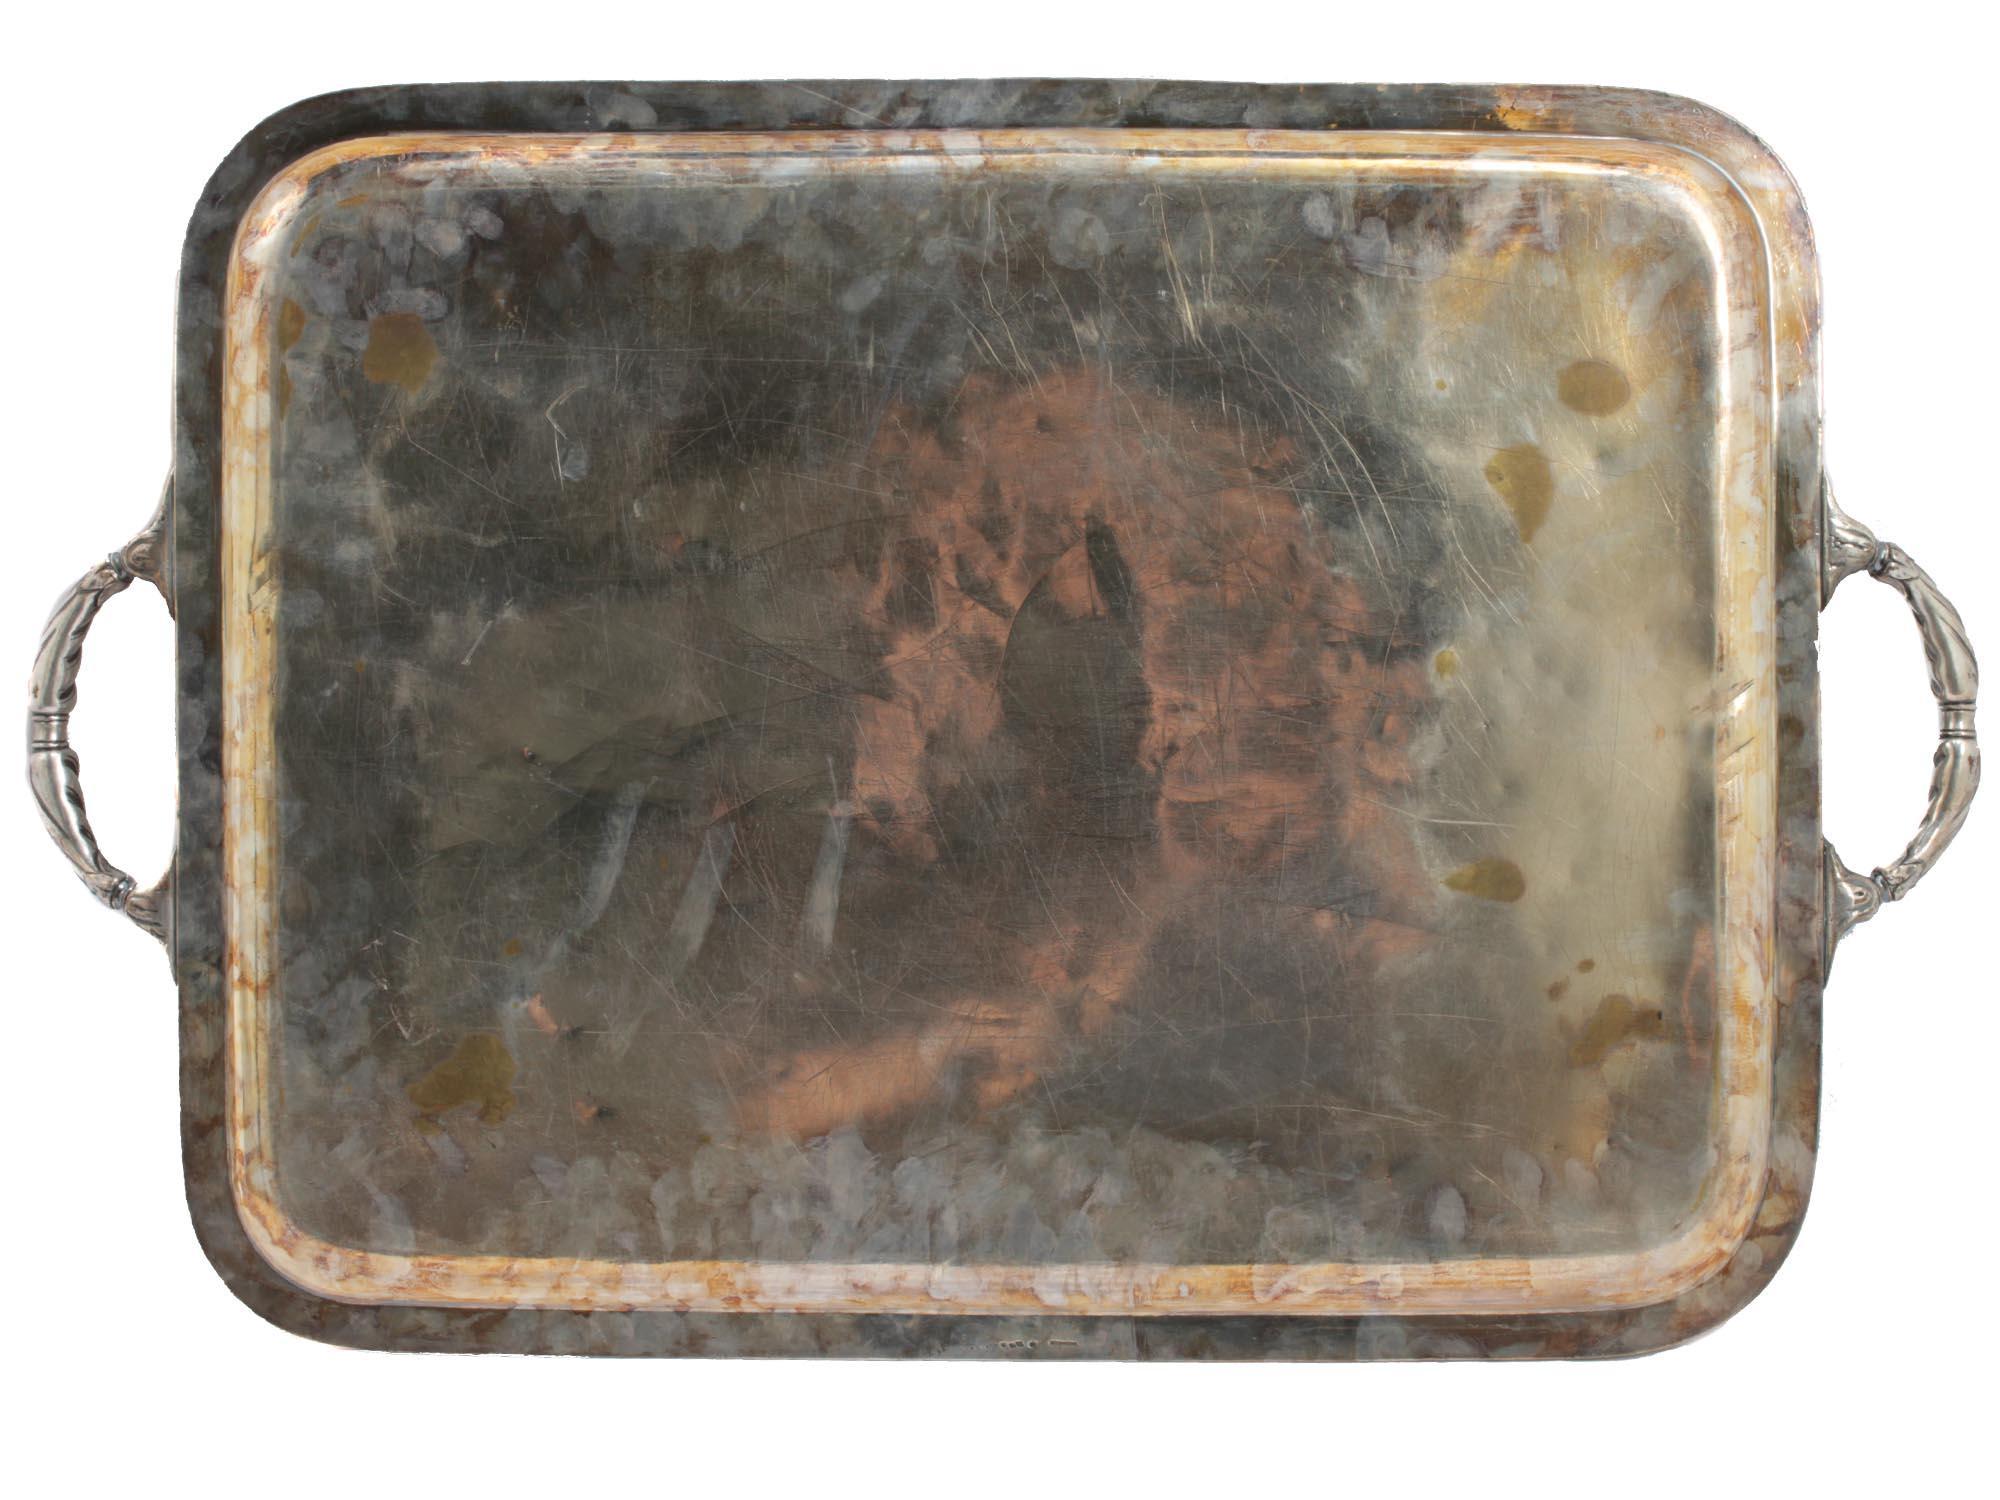 Napoleonic Silverplated Tray by Christofle circa 1850 In Good Condition For Sale In New York, US